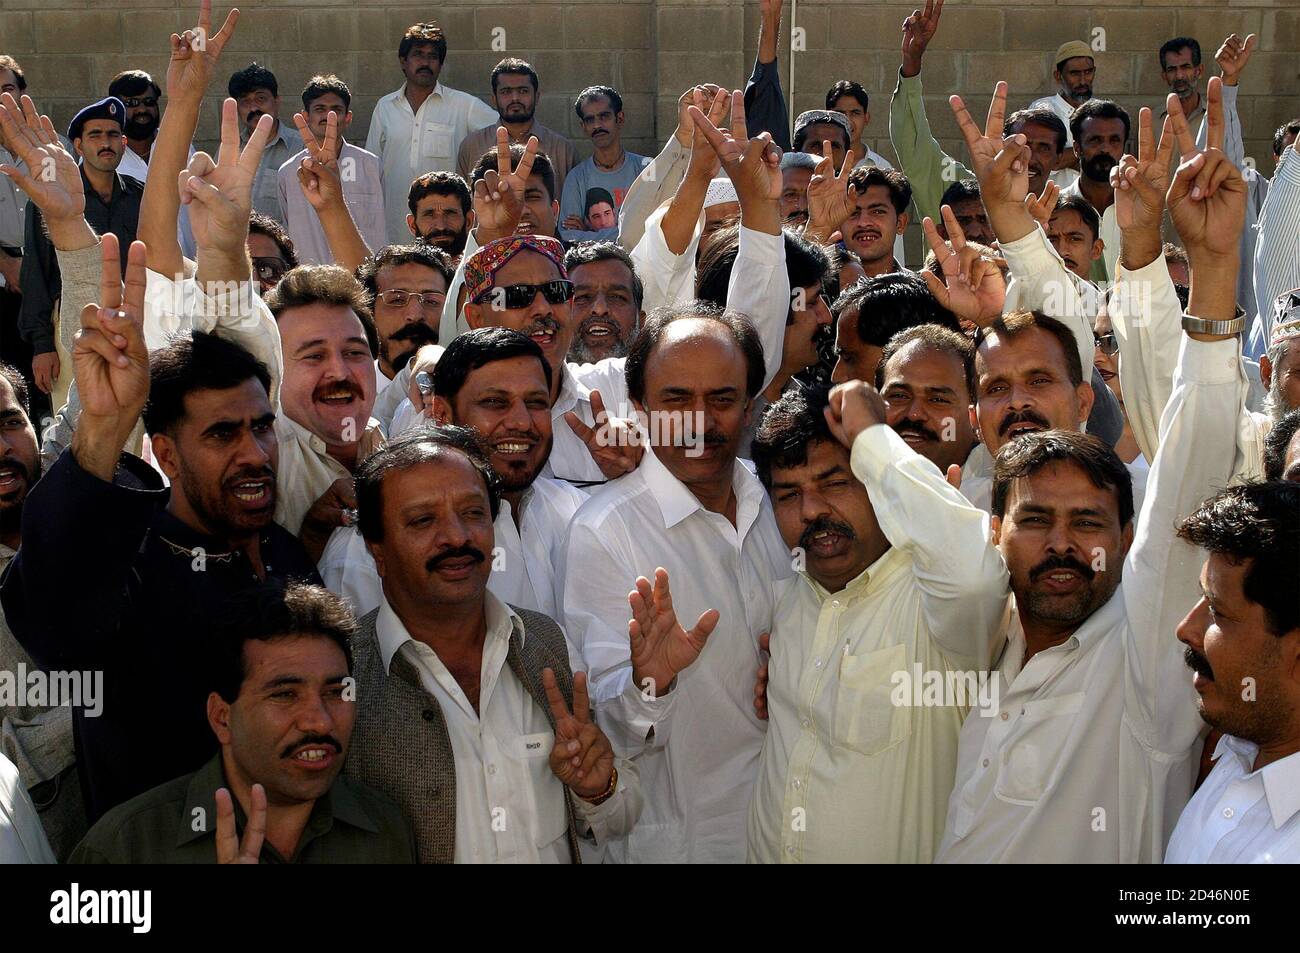 Supporters of opposition Pakistan People's Party celebrate court's decision to grant bail to Asif Zardari in Karachi.  Supporters of the opposition Pakistan People's Party celebrate a Pakistani court's decision to grant bail to Asif Ali Zardari, husband of Pakistan's former prime minister Benazir Bhutto, in Karachi November 22, 2004. The court on Monday granted bail to him and the government said the decision would result in his release after eight years in prison. REUTERS/Zahid Hussein Stock Photo